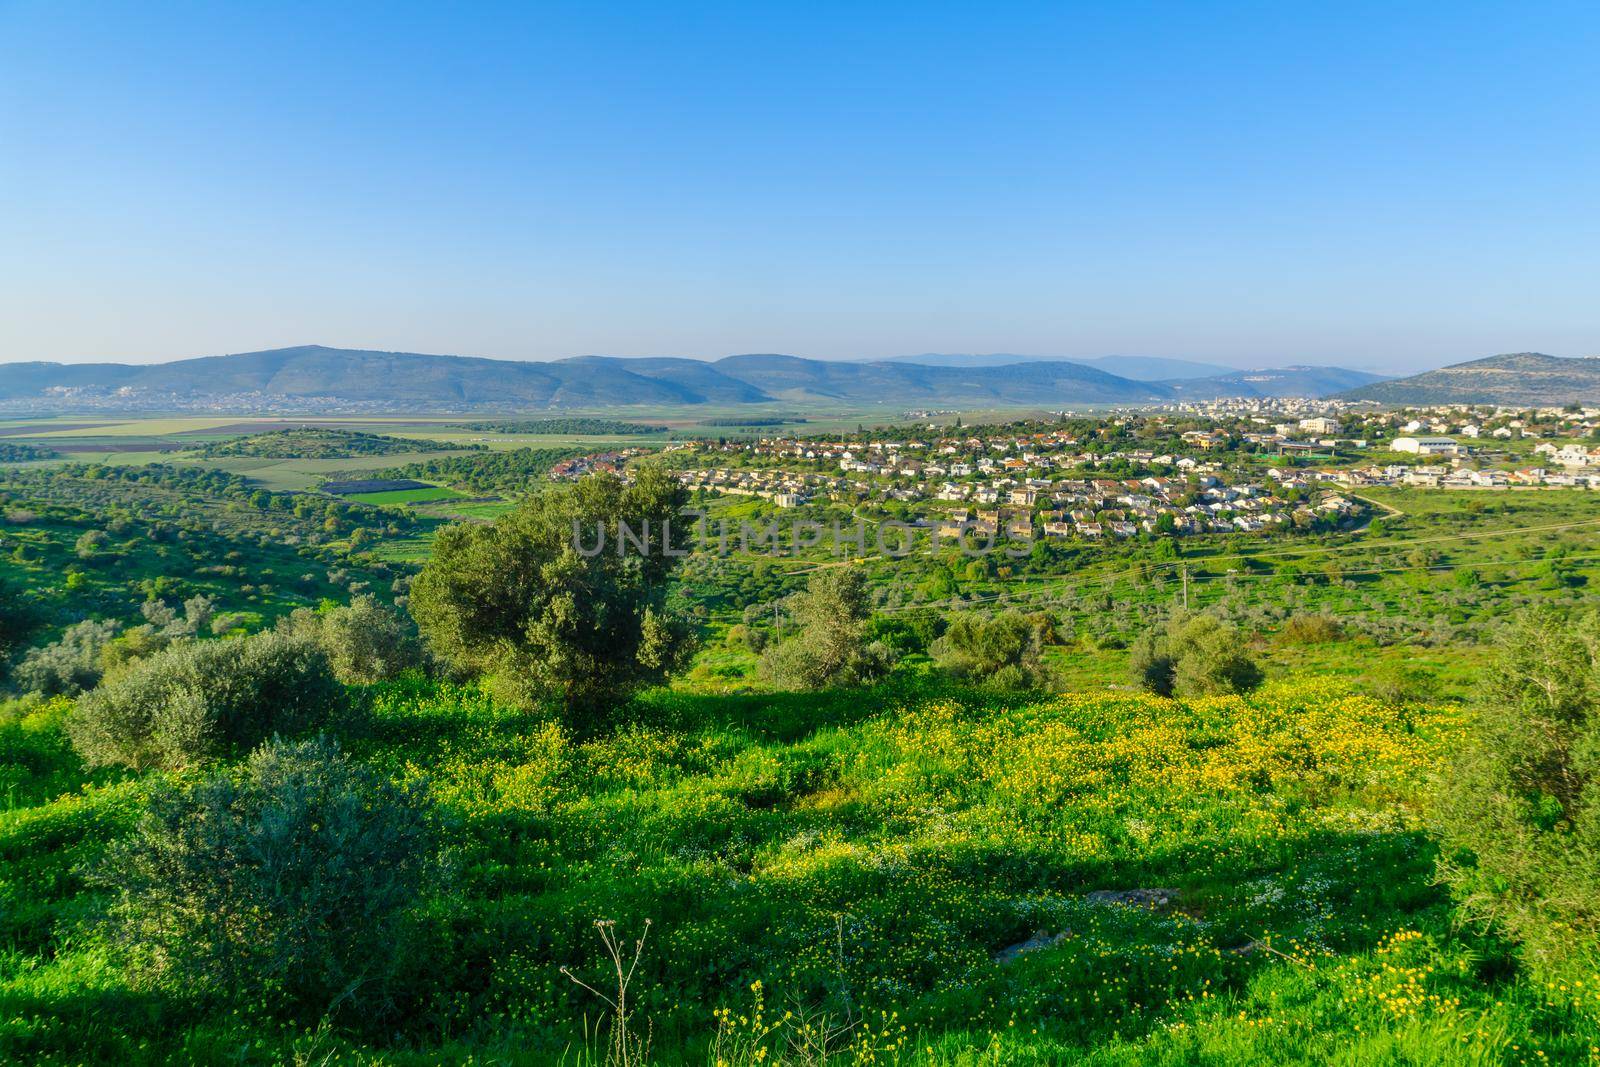 Landscape and countryside of the western Lower Galilee by RnDmS